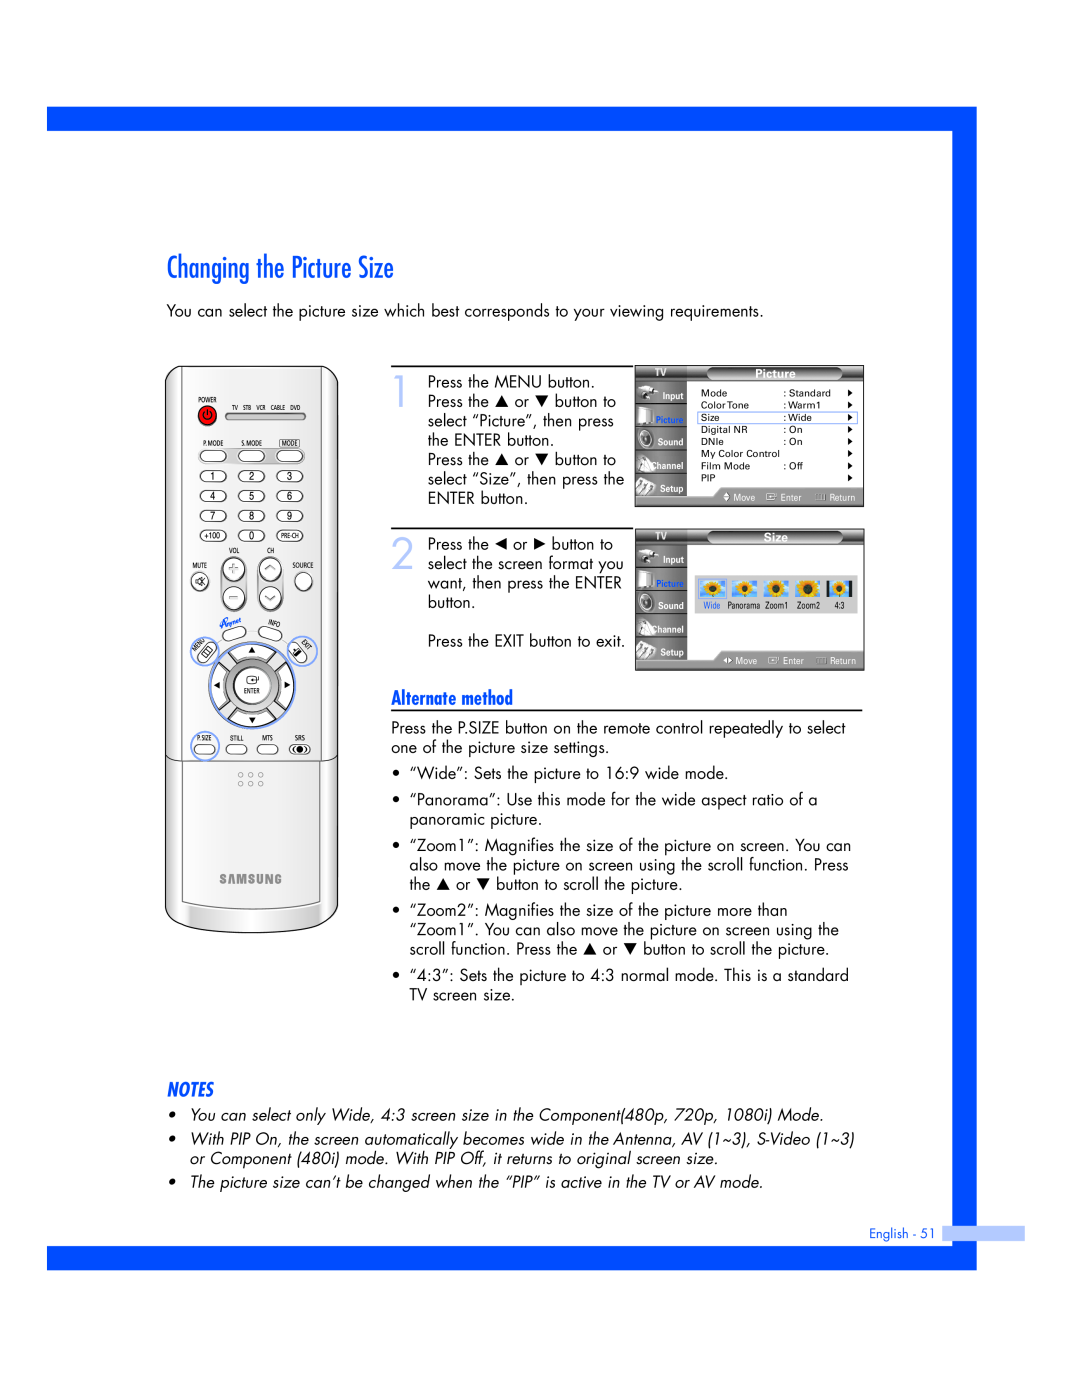 Samsung HL-P4674W instruction manual Changing the Picture Size, Alternate method 